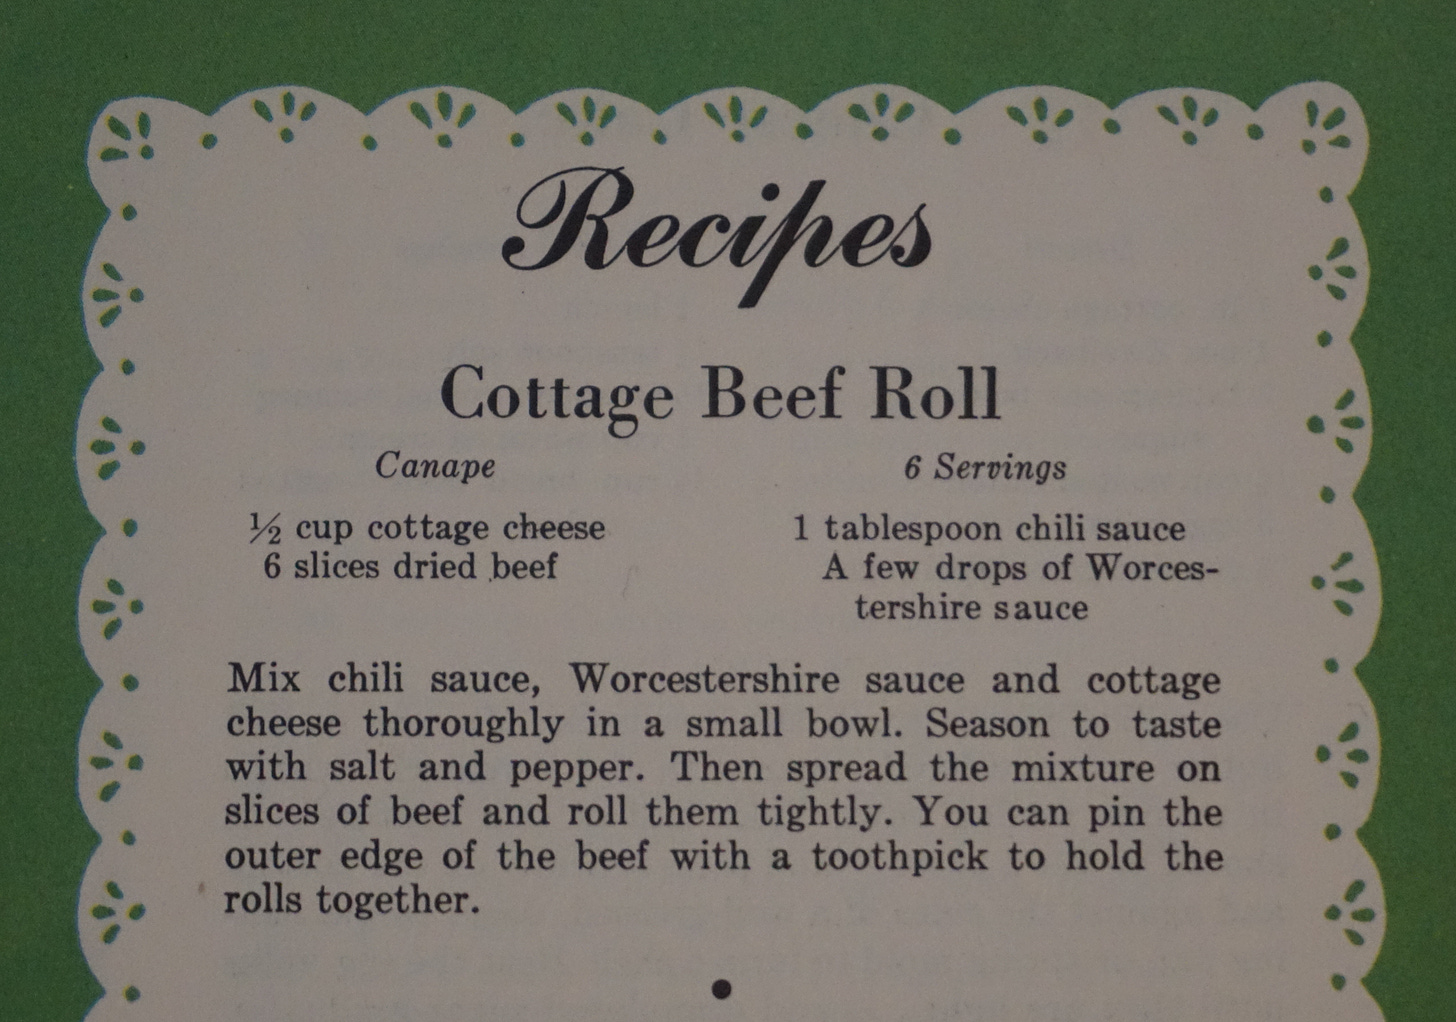 Recipe for something called "Cottage Beef Roll" which is cottage cheese rolled up in slices of dried beef and speared with a toothpick.